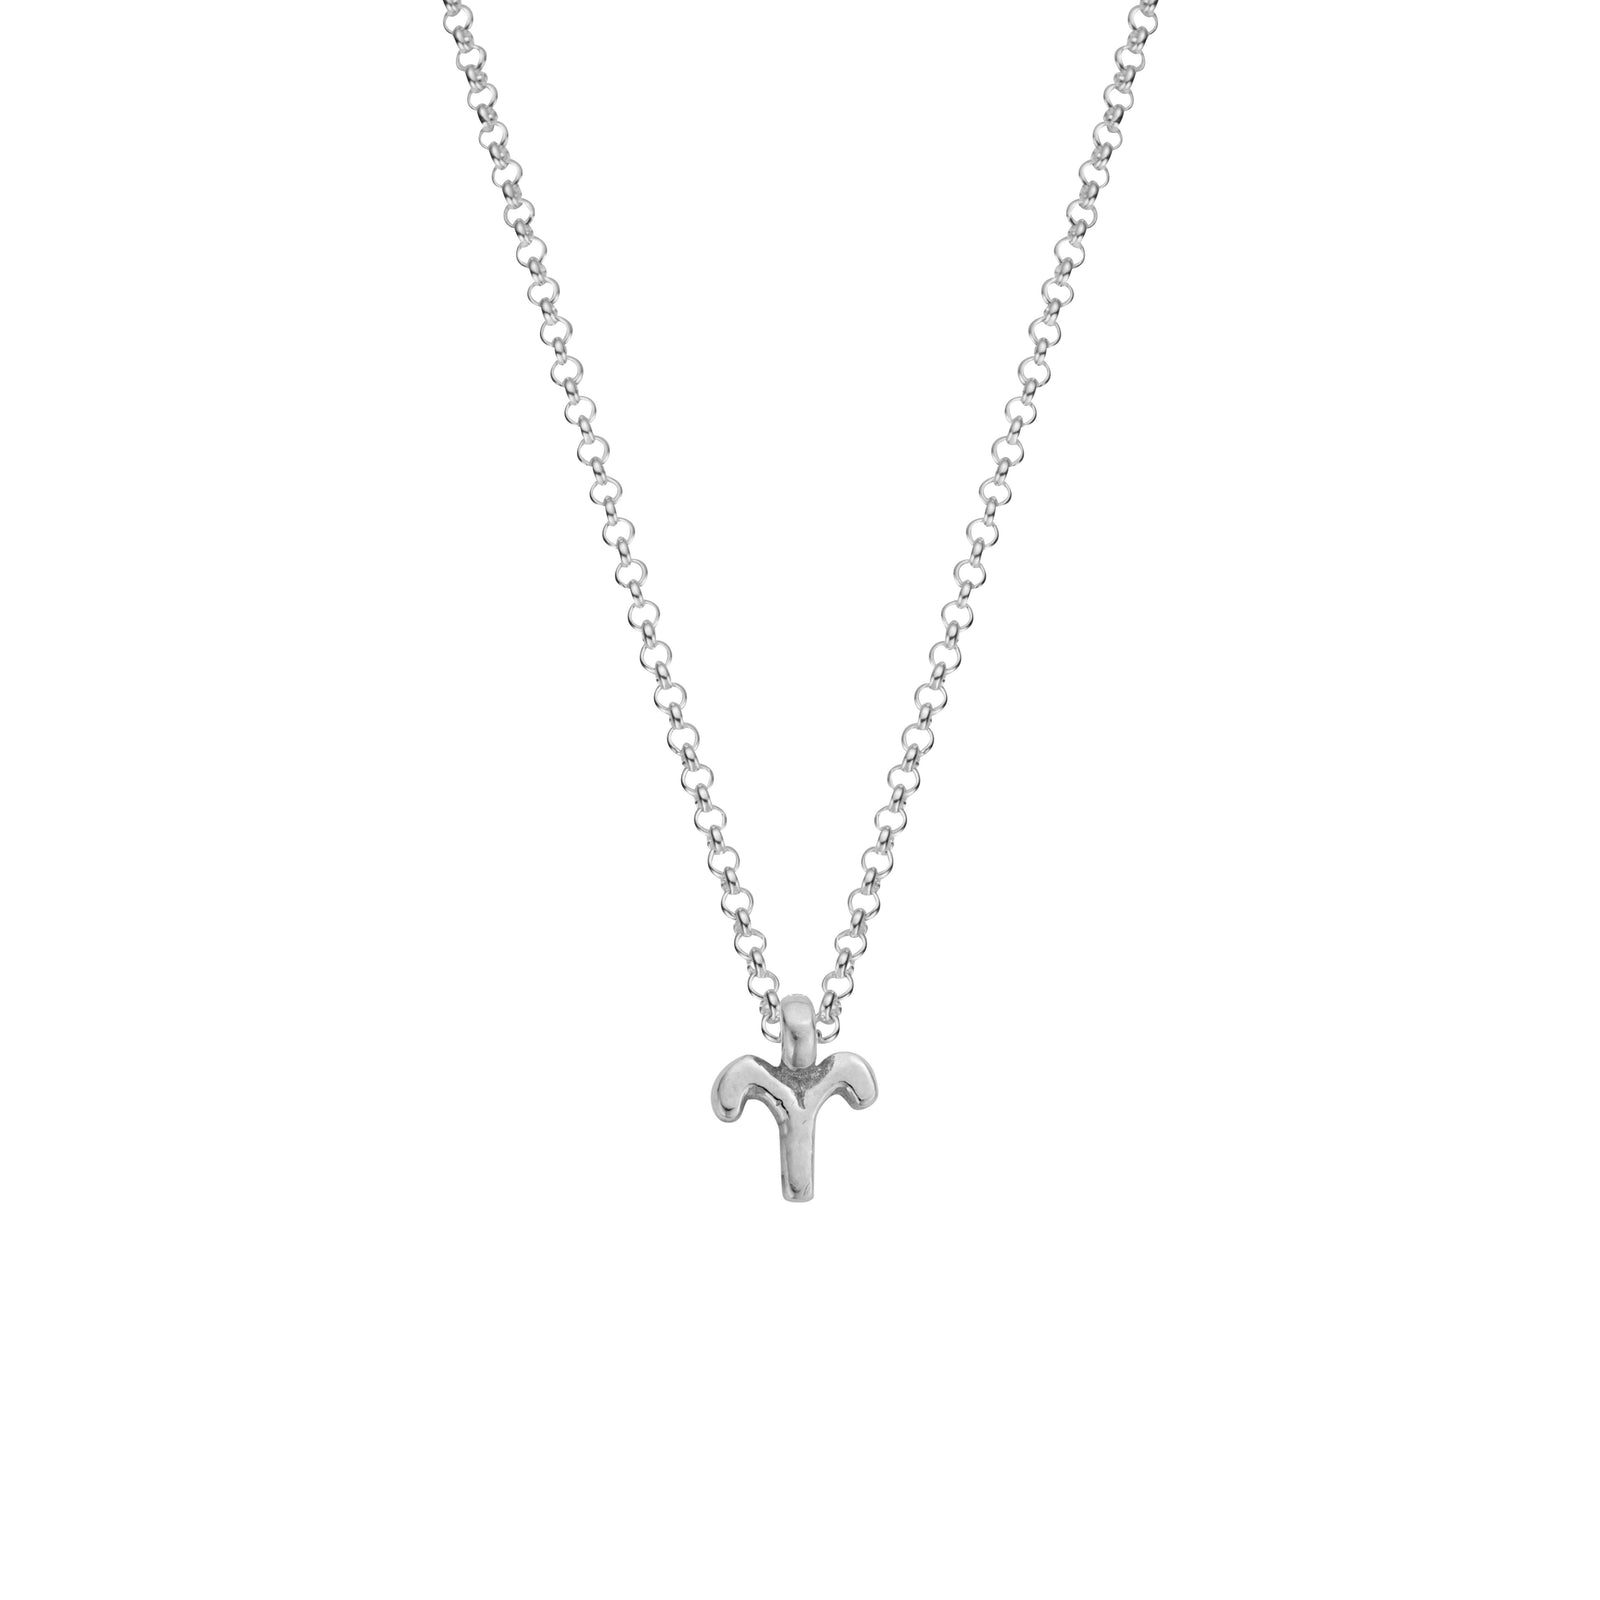 Silver Aries Men's Horoscope Necklace